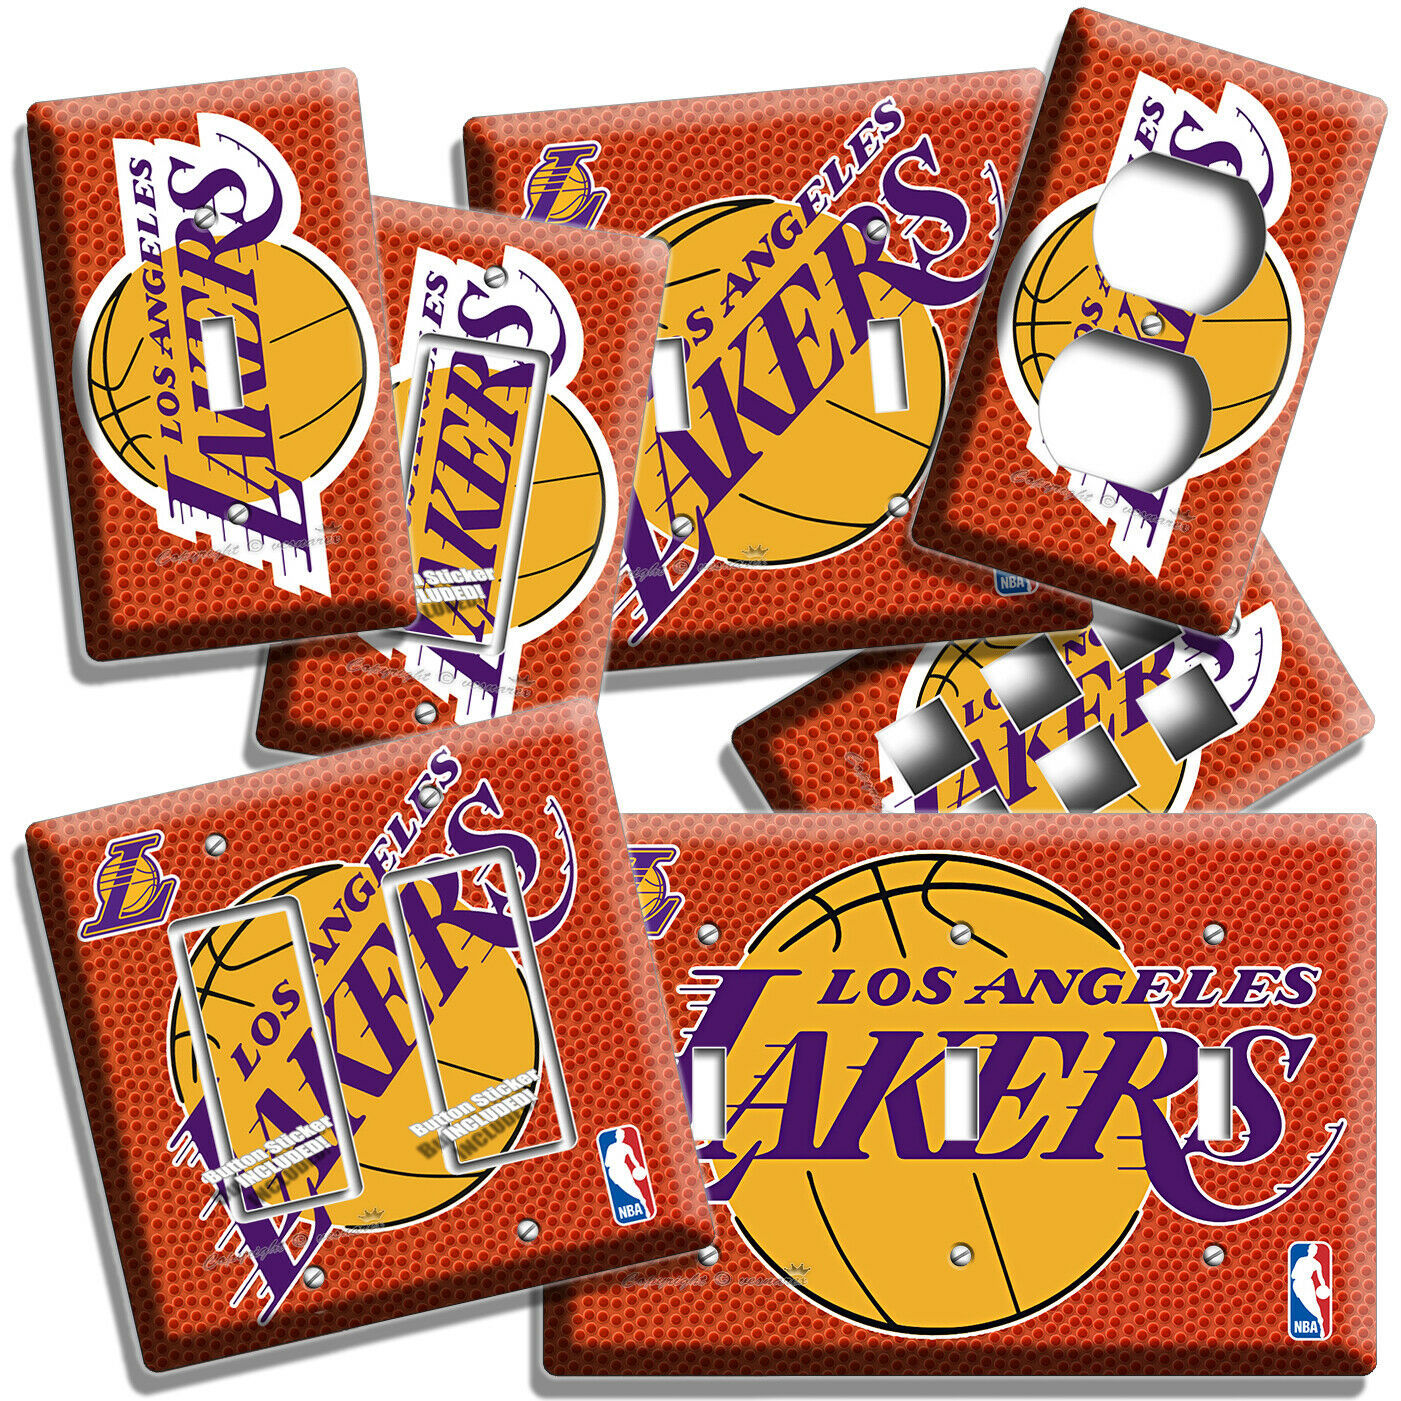 LOS ANGELES LAKERS TEAM BASKETBALL CHAMPION LIGHT SWITCH OUTLET WALL PLATE DECOR